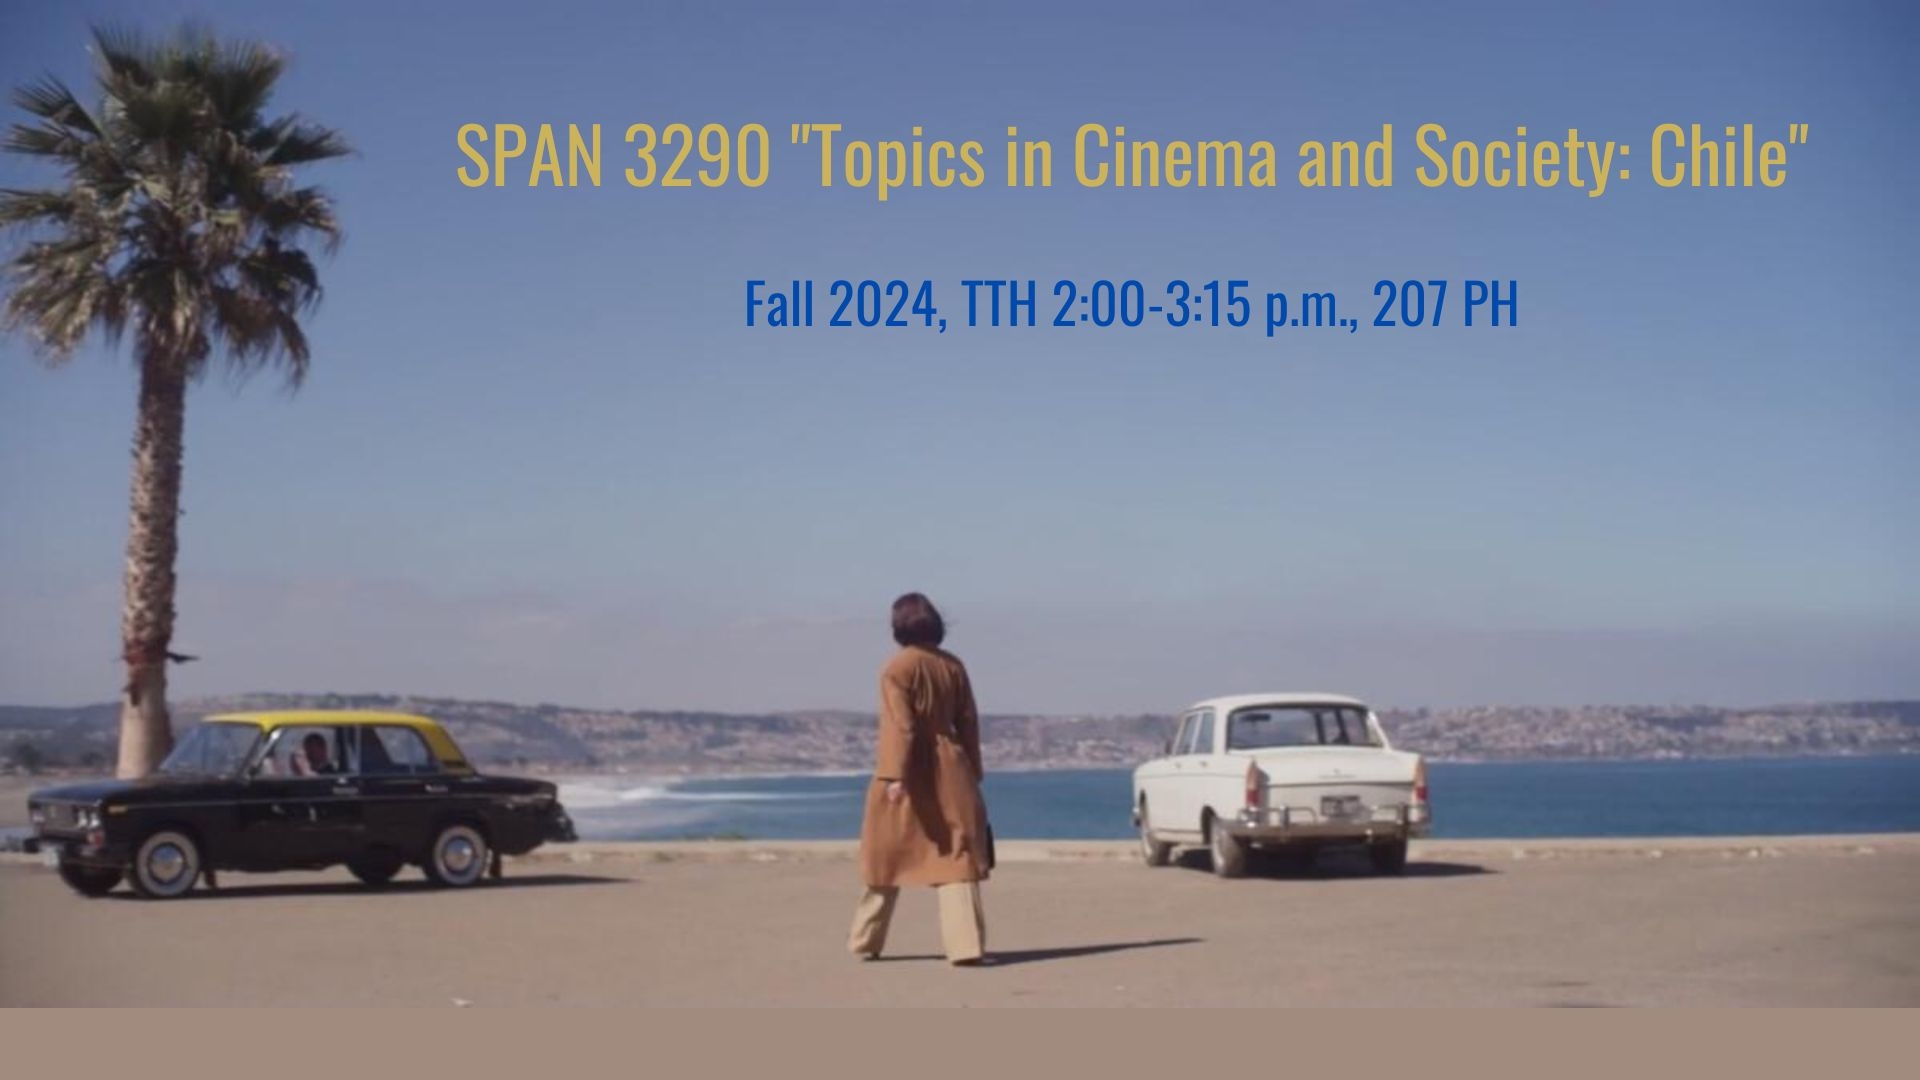 Topics in Cinema and Society: Chile Fall 2024